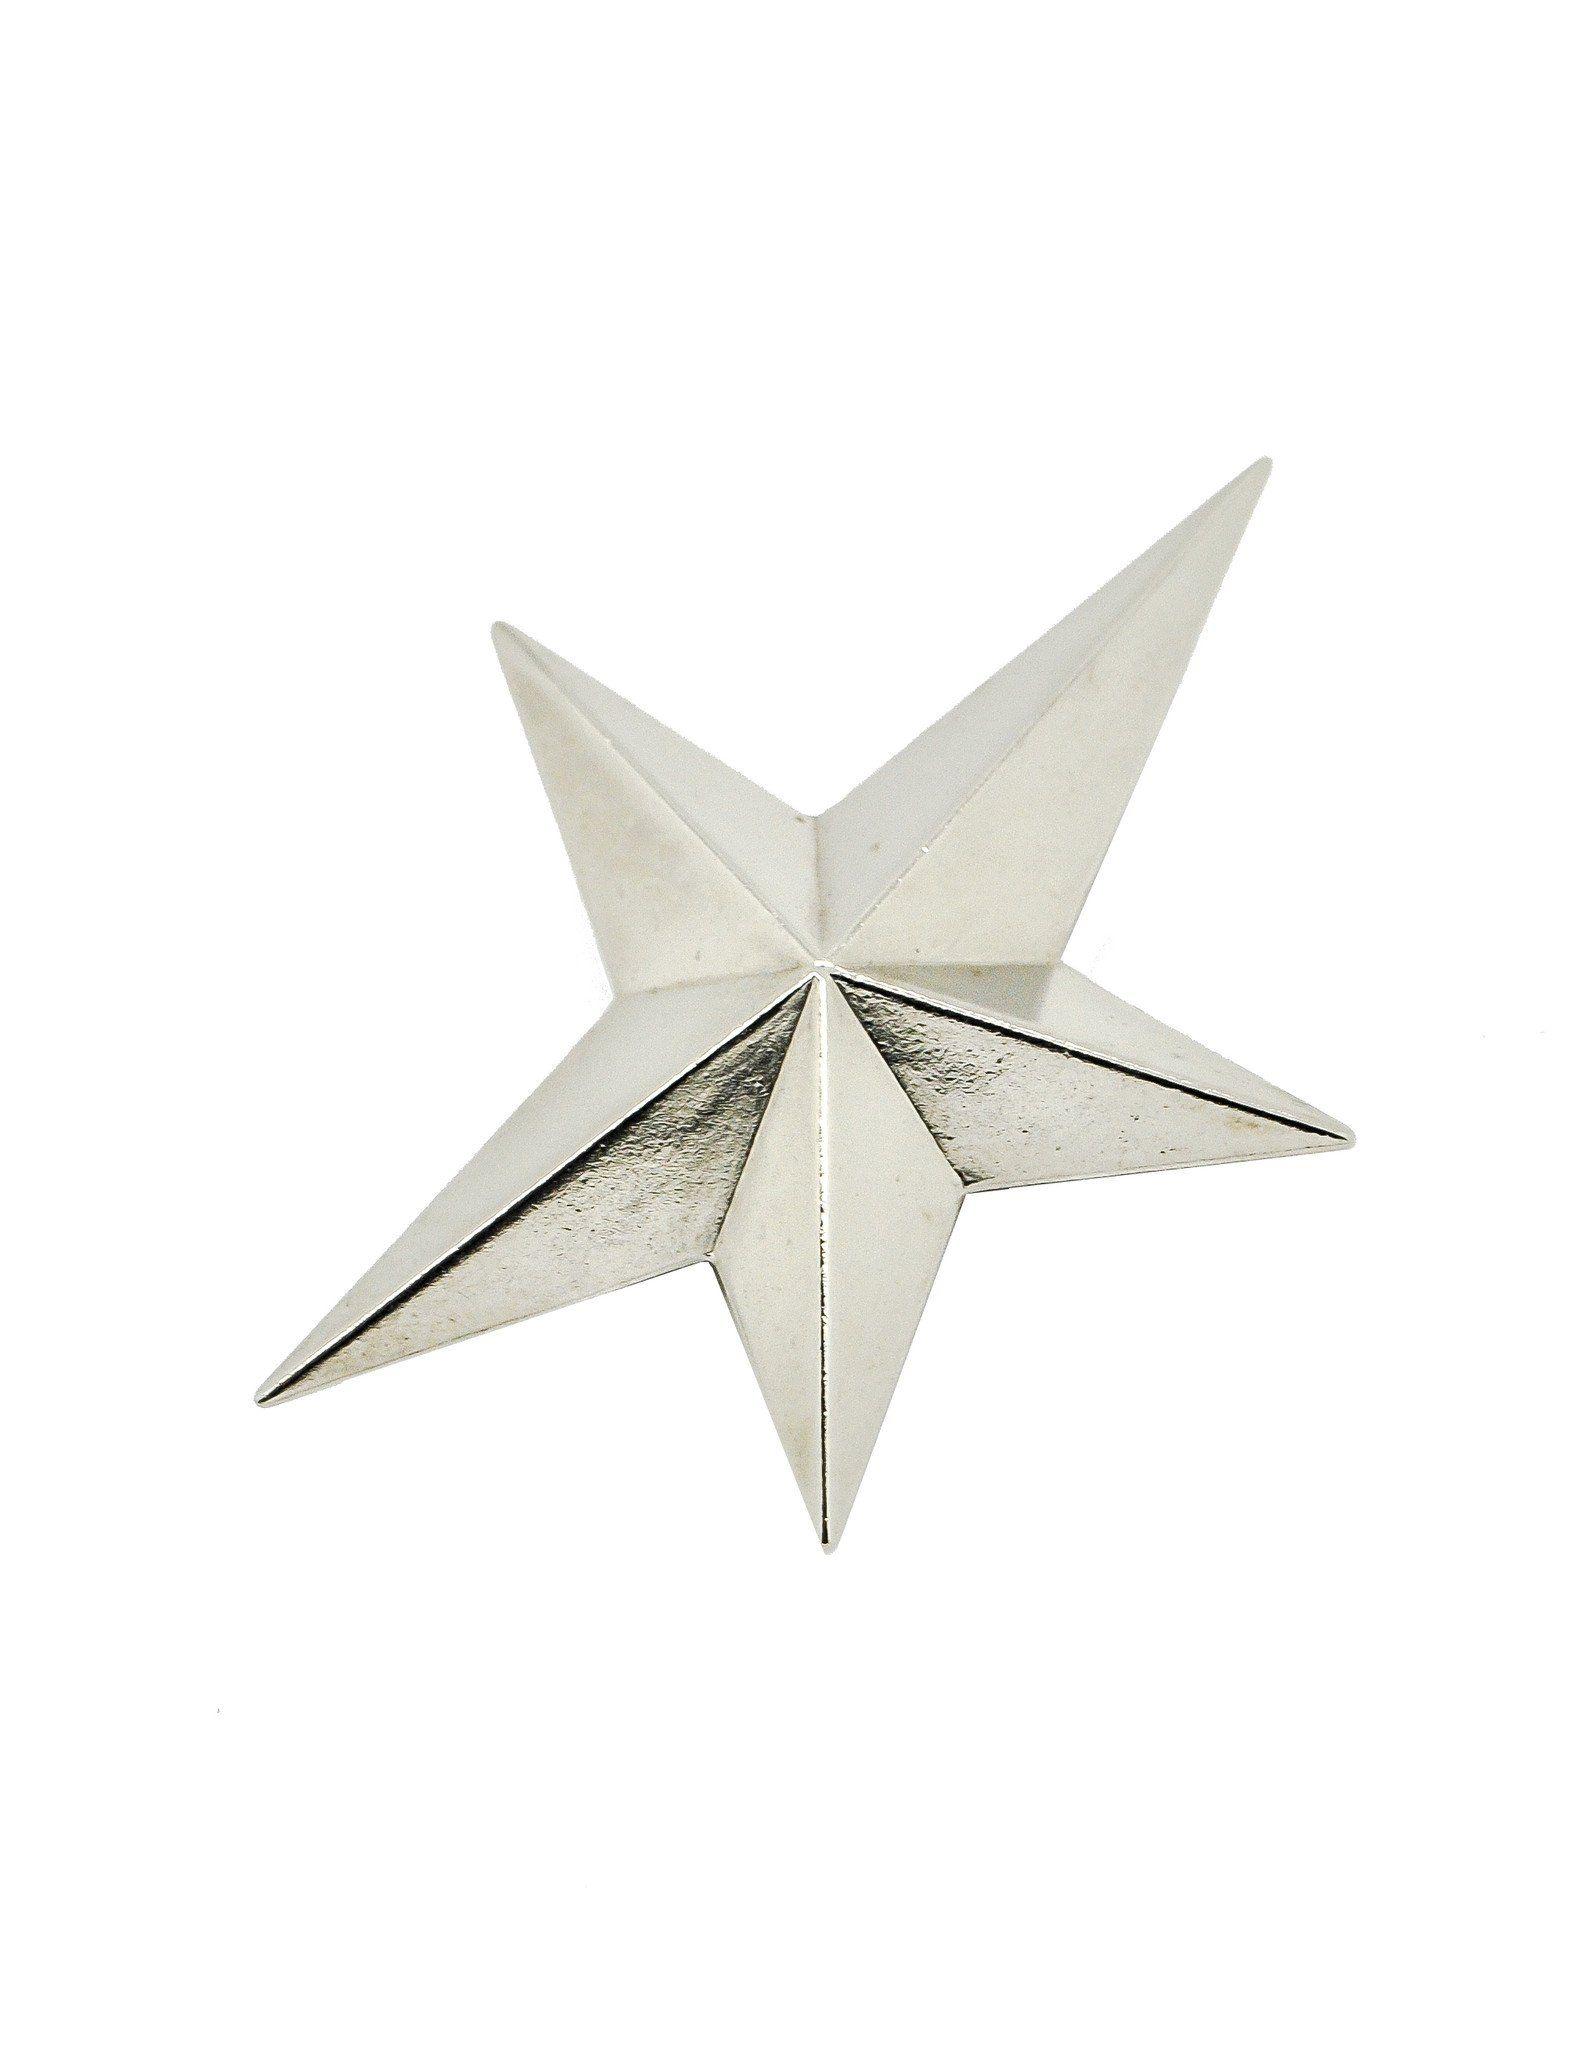 Thierry Mugler Logo - Thierry Mugler Vintage Silver Star Brooch - from Amarcord Vintage ...